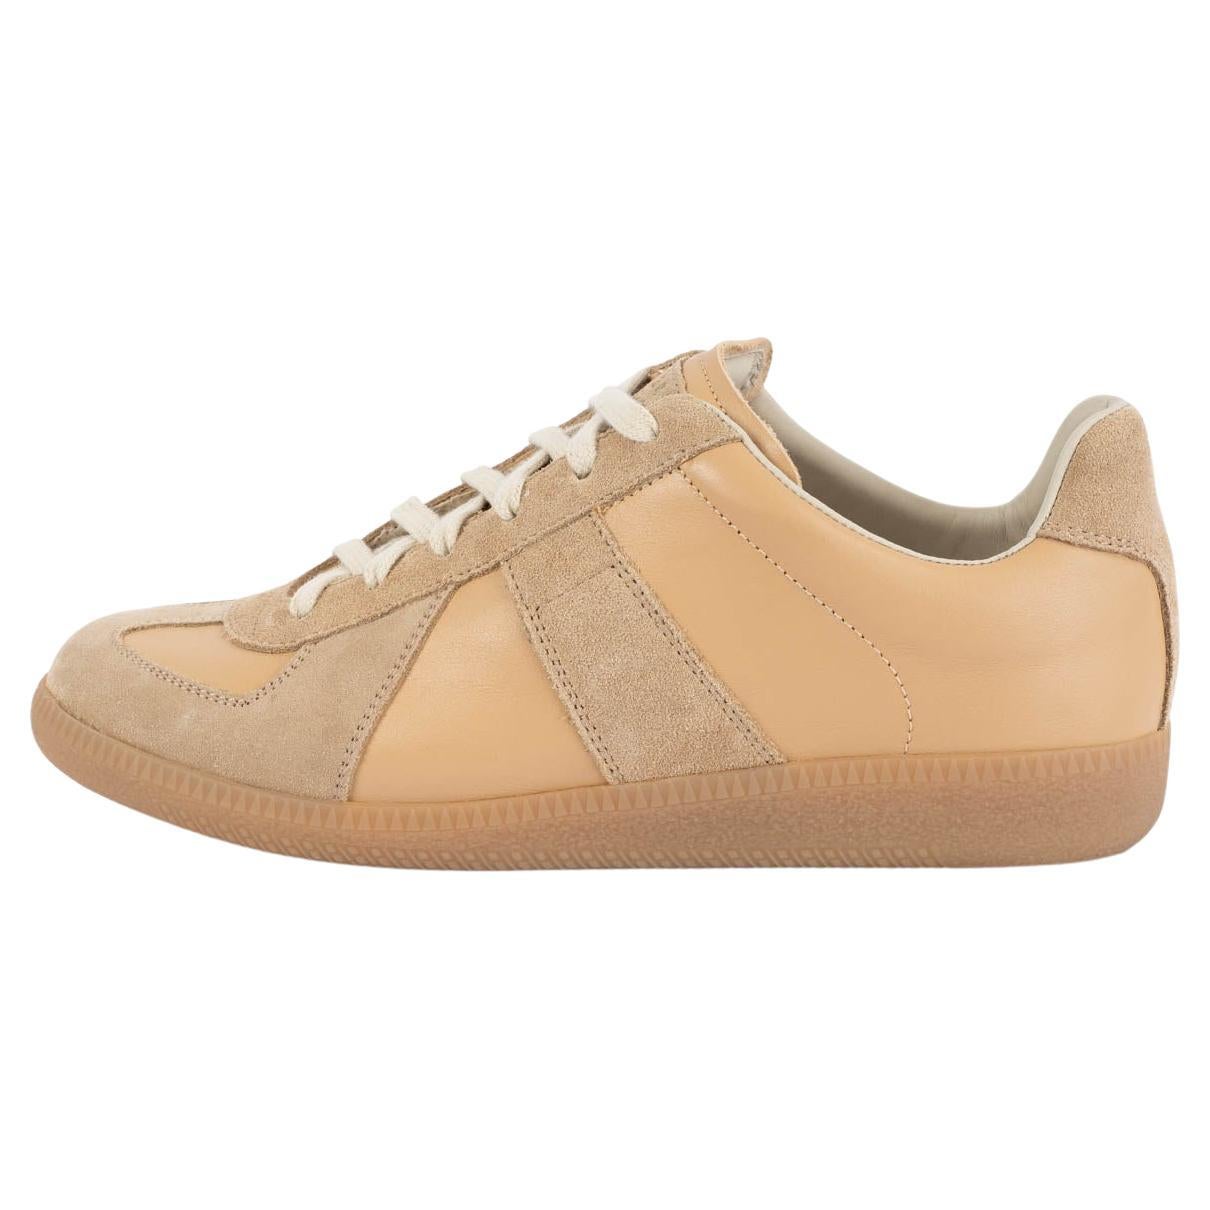 MAISON MARGIELA beige leather & suede REPLICA LOW TOP Sneakers Shoes 38 For Sale